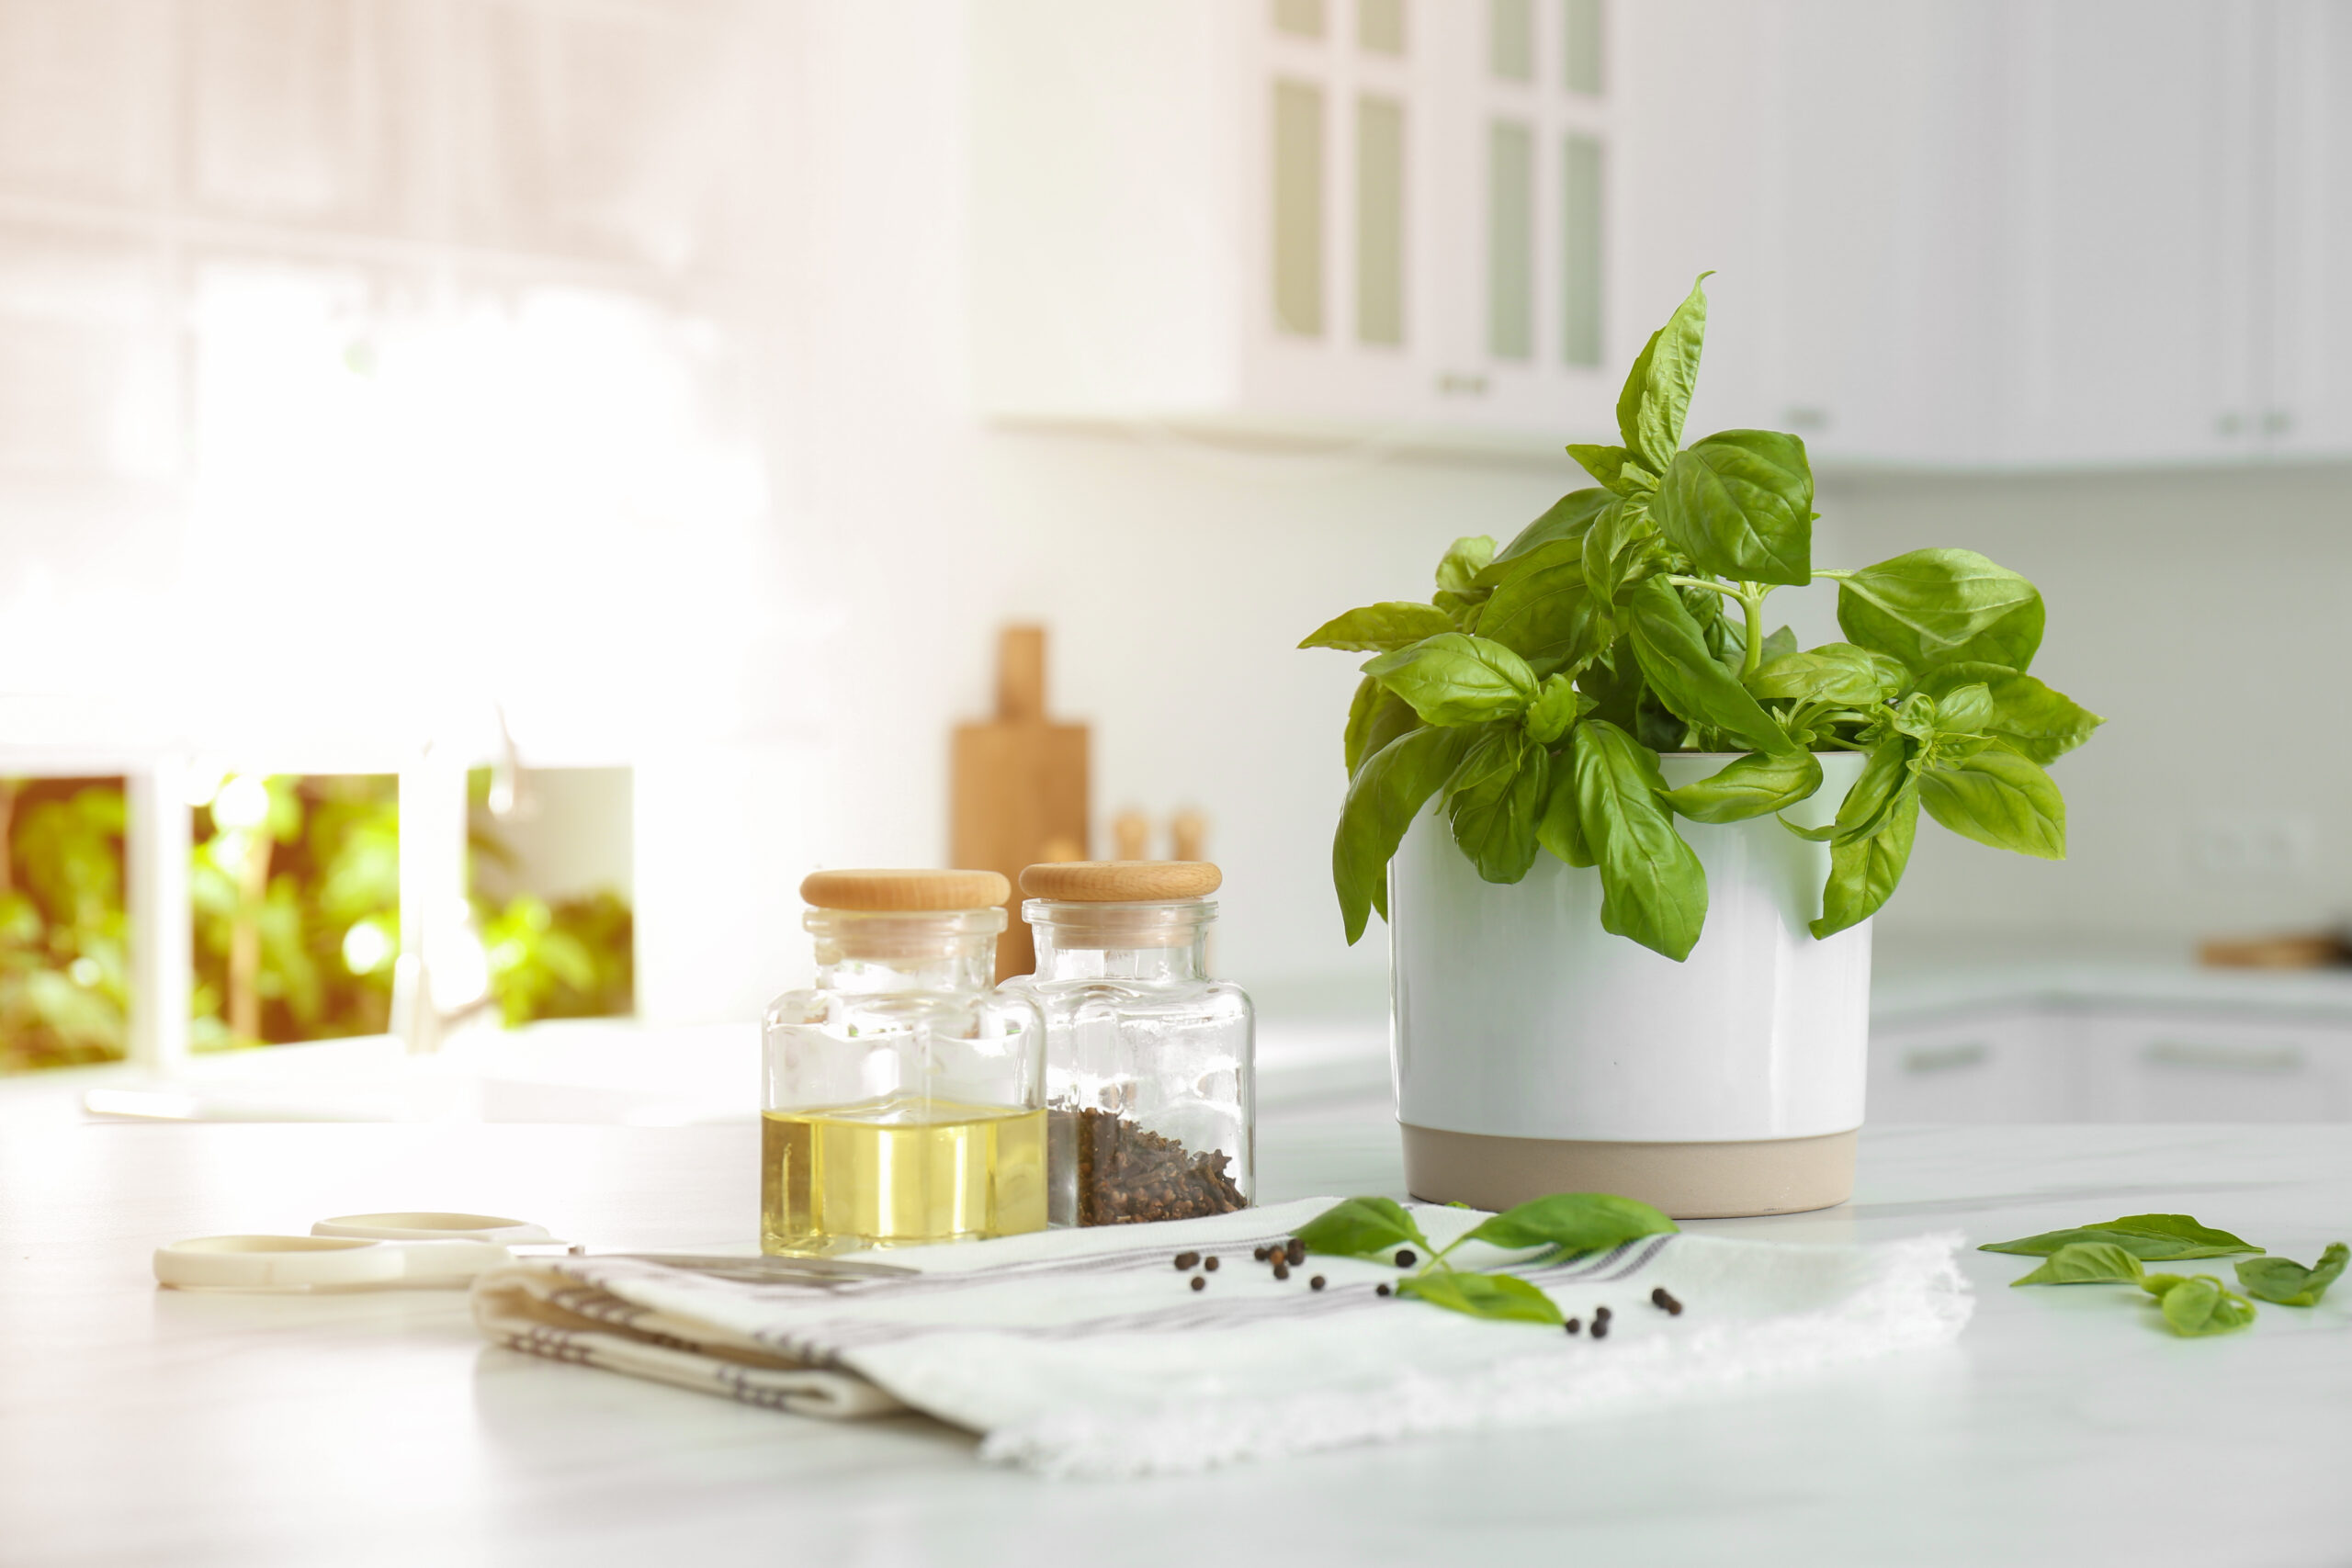 Herbs for the Home: For Making, Baking & Decorating